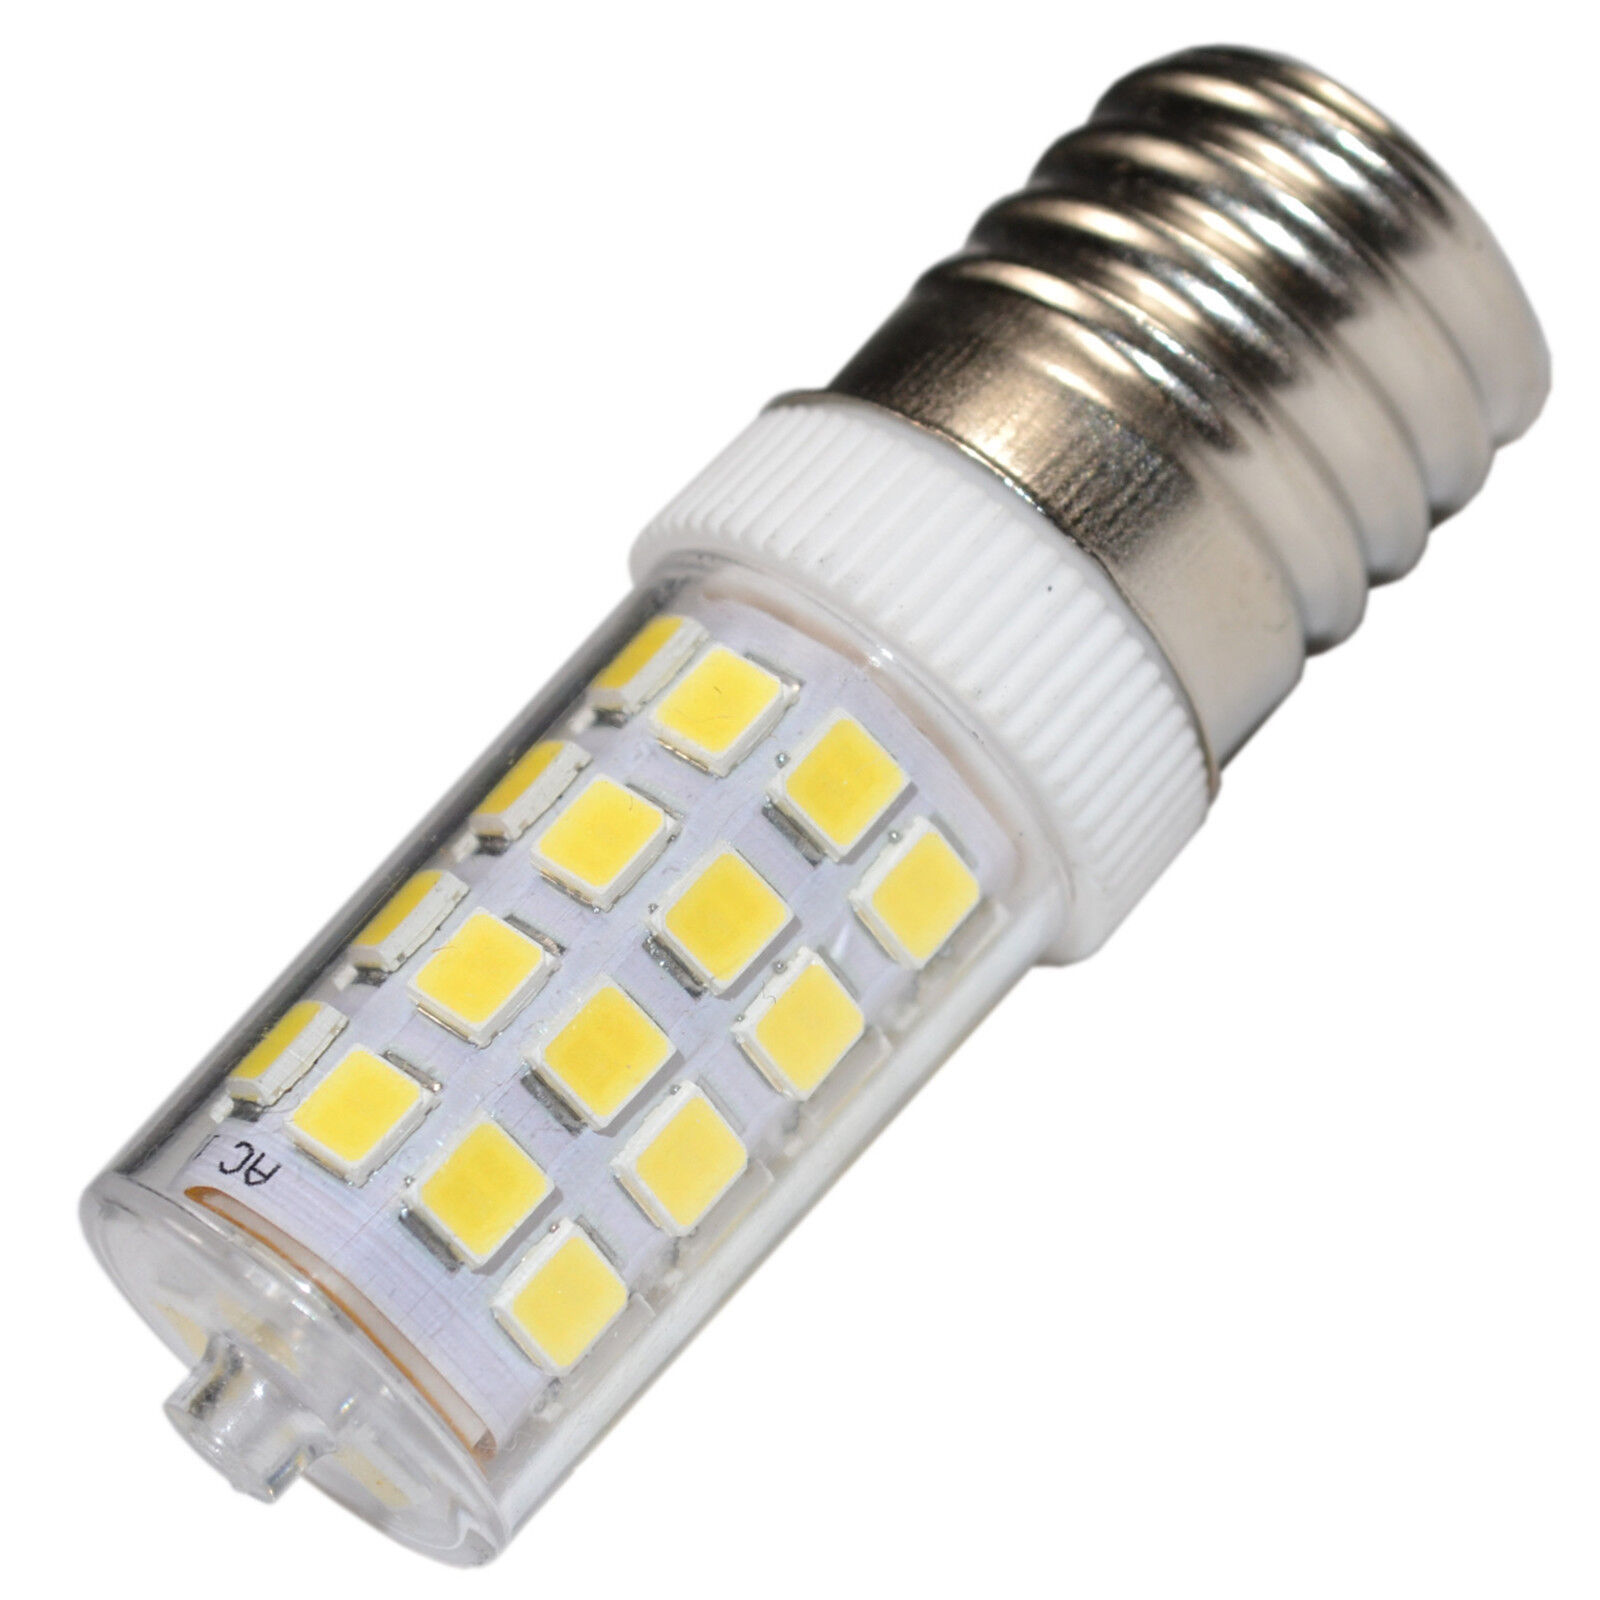 110V E17 Dimmable LED Light Bulb for LG 6912W1Z004B Microwave Light Replacement - $26.99